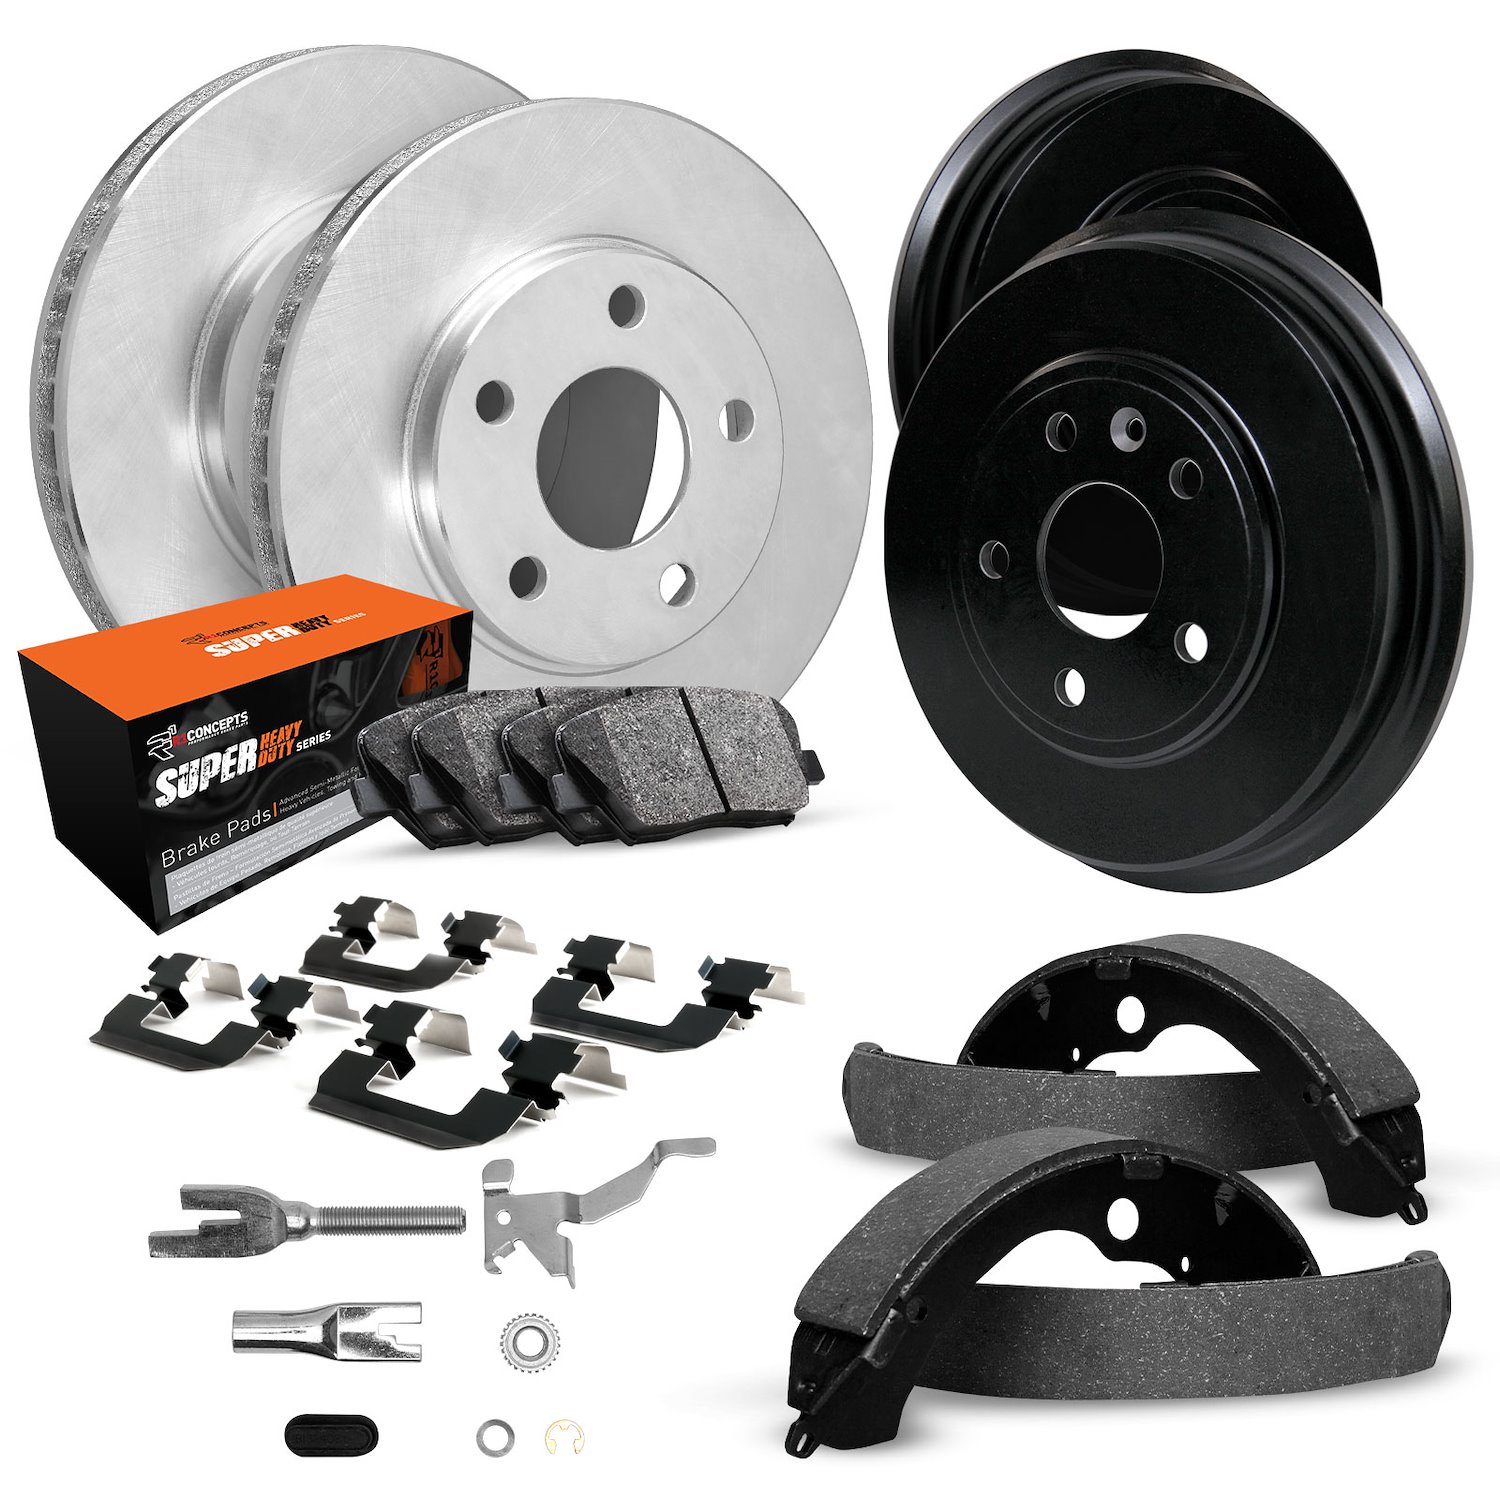 E-Line Blank Brake Rotor & Drum Set w/Super-Duty Pads, Shoes, Hardware, & Adjusters, 1986-1990 GM, Position: Front & Rear